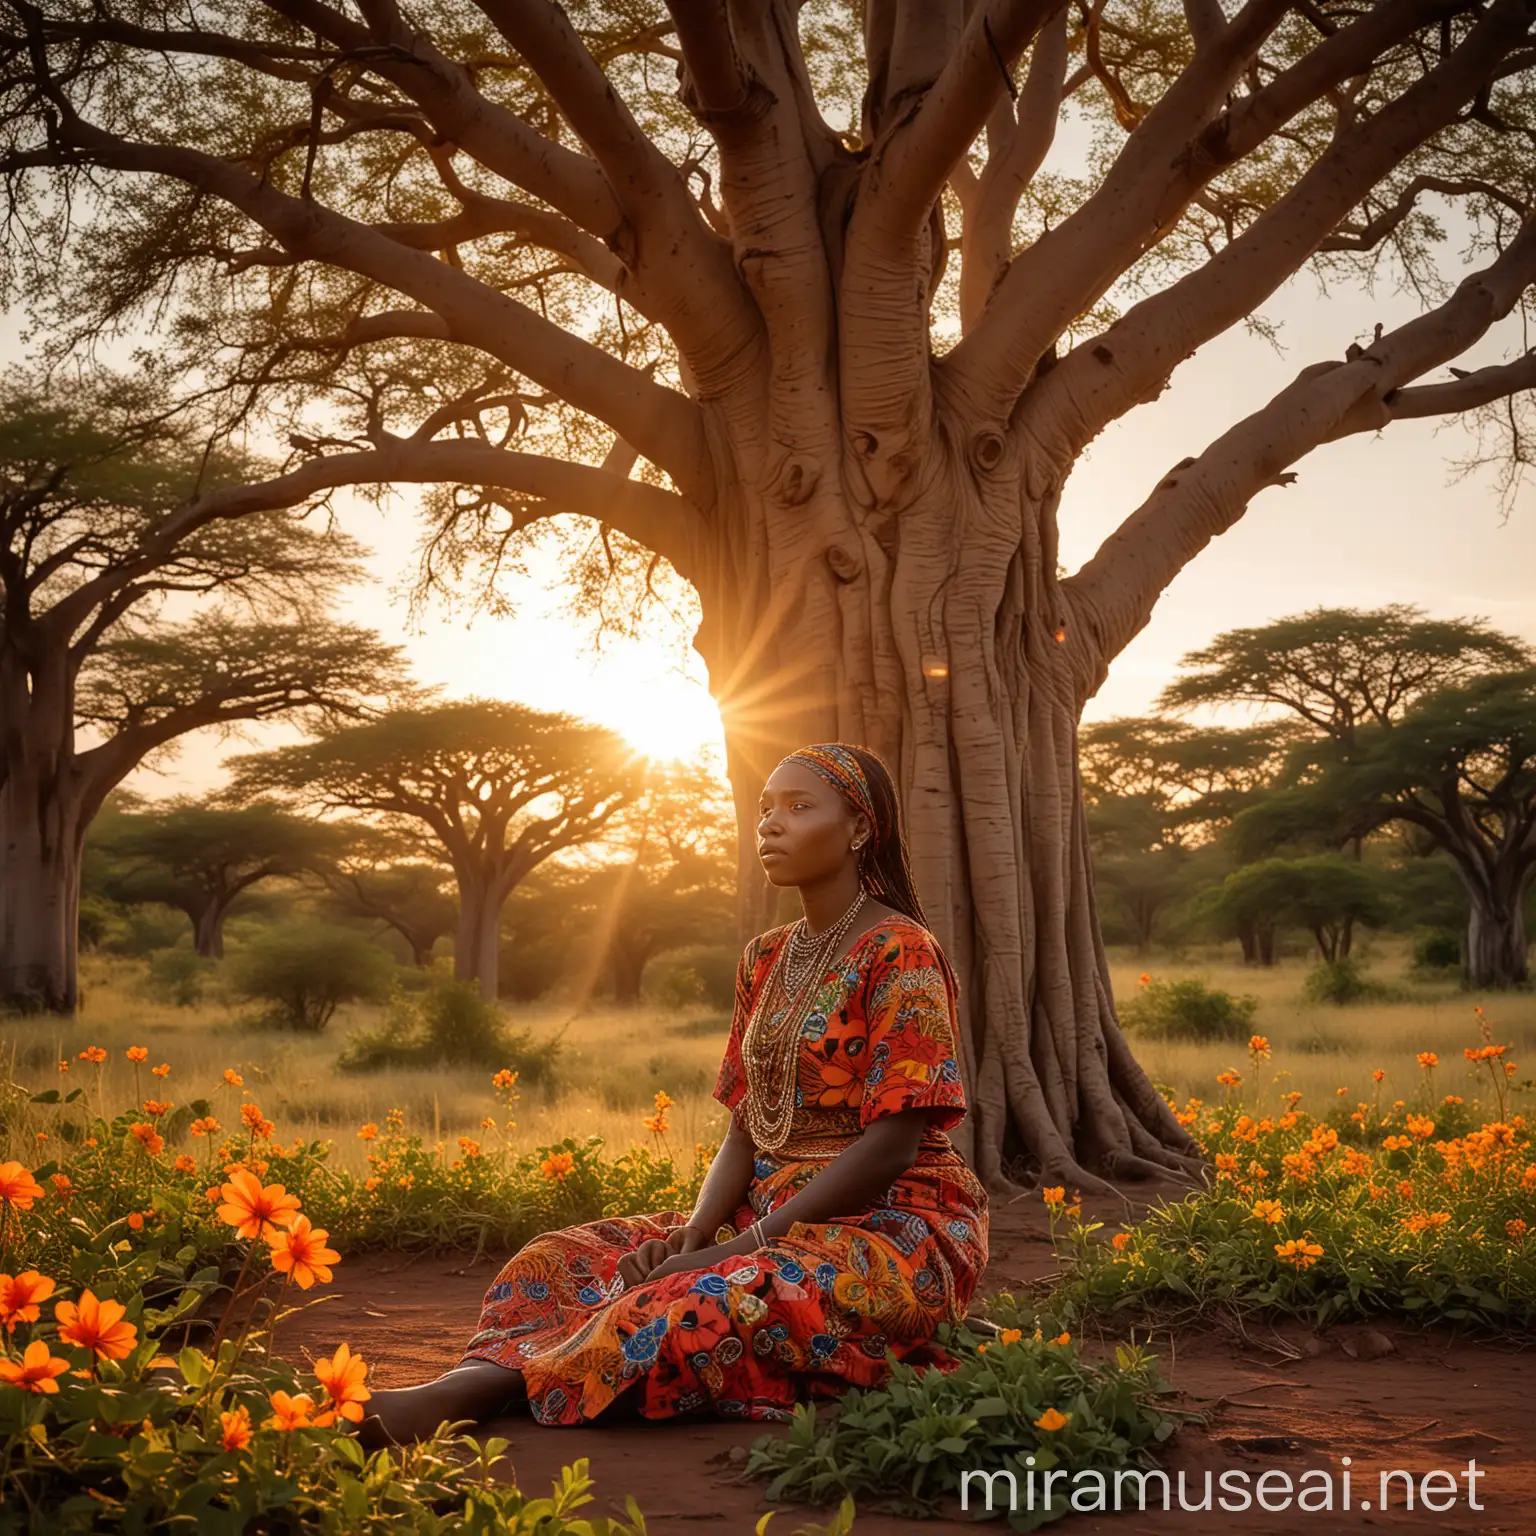 Description: A serene African savannah at dusk, with the golden light of the setting sun casting long shadows. In the center, the majestic sacred Baobab tree stands tall with its sprawling branches and thick trunk, surrounded by lush greenery and colorful flowers. Amina, a young woman with braided hair adorned with beads and wearing a bright, patterned dress, kneels by the tree, her face illuminated by the soft glow of a metallic box half-buried in the soil. Beside her, Mama Juma, an elderly woman with wise, kind eyes and traditional attire, looks on with curiosity and wonder.